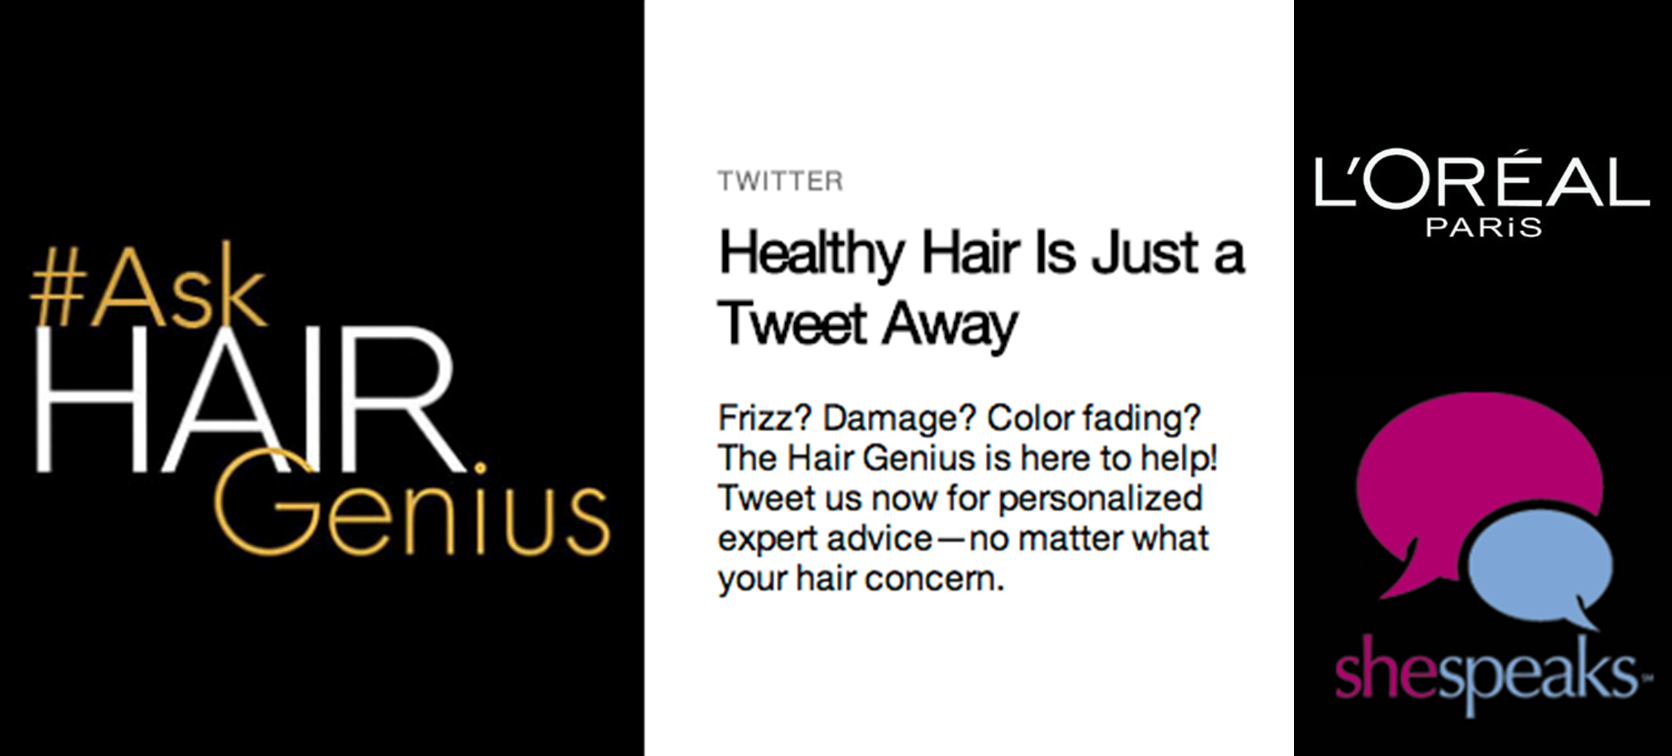 #AskHairGenius and #AdvancedHaircare - Logo - https://s41078.pcdn.co/wp-content/uploads/2018/11/LOrealSheSpeaks-1.png